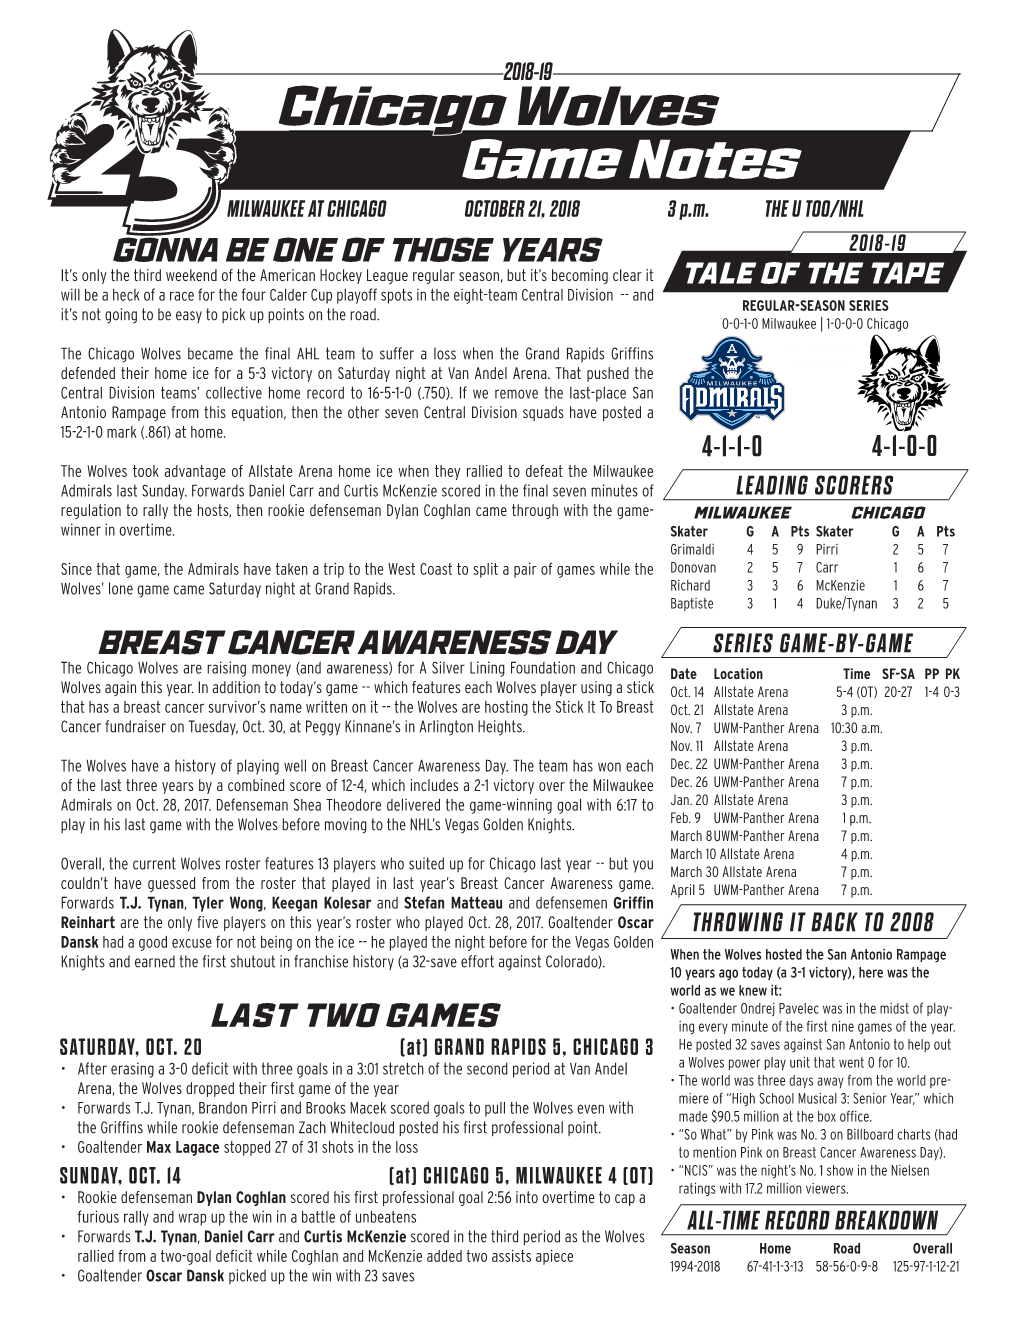 Chicago Wolves Game Notes MILWAUKEE at CHICAGO OCTOBER 21, 2018 3 P.M